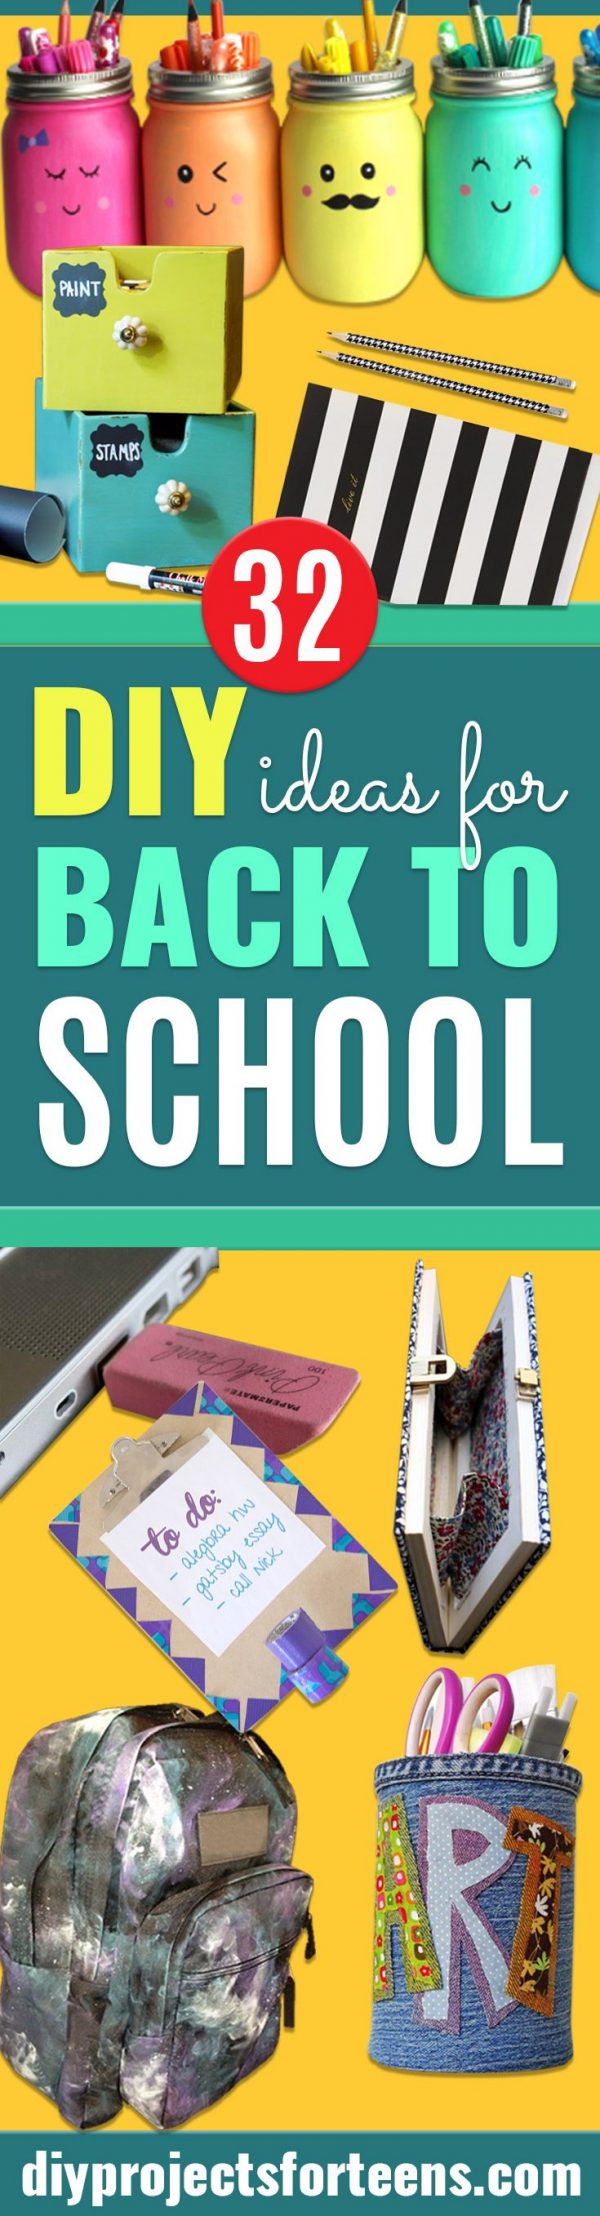 DIY School Supplies You Need For Back To School - Cuter, Cool and Easy Projects for Teens, Tweens and Kids to Make for Middle School and High School. Fun Ideas for Backpacks, Pencils, Notebooks, Organizers, Binders #diyschoolsupplies #backtoschool #teencrafts